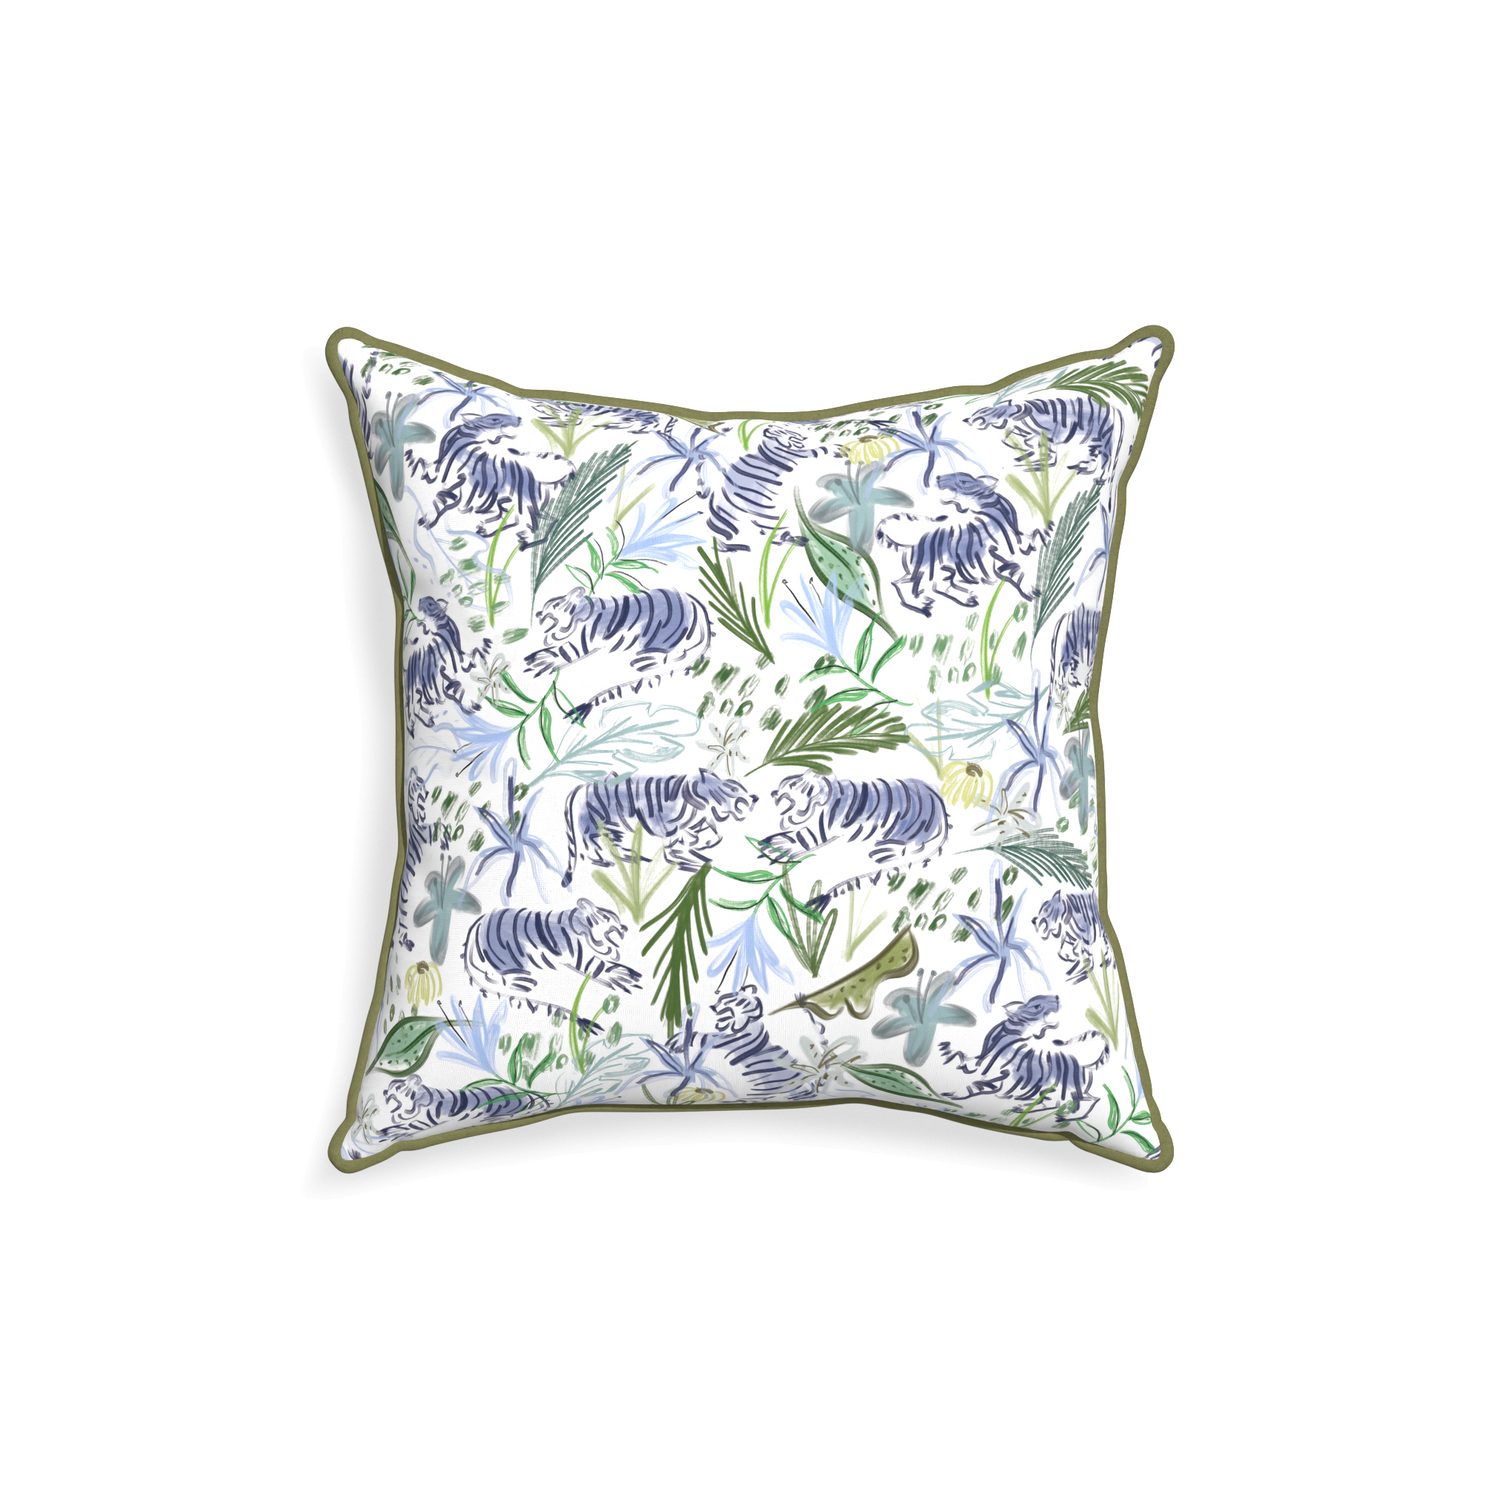 18-square frida green custom pillow with moss piping on white background